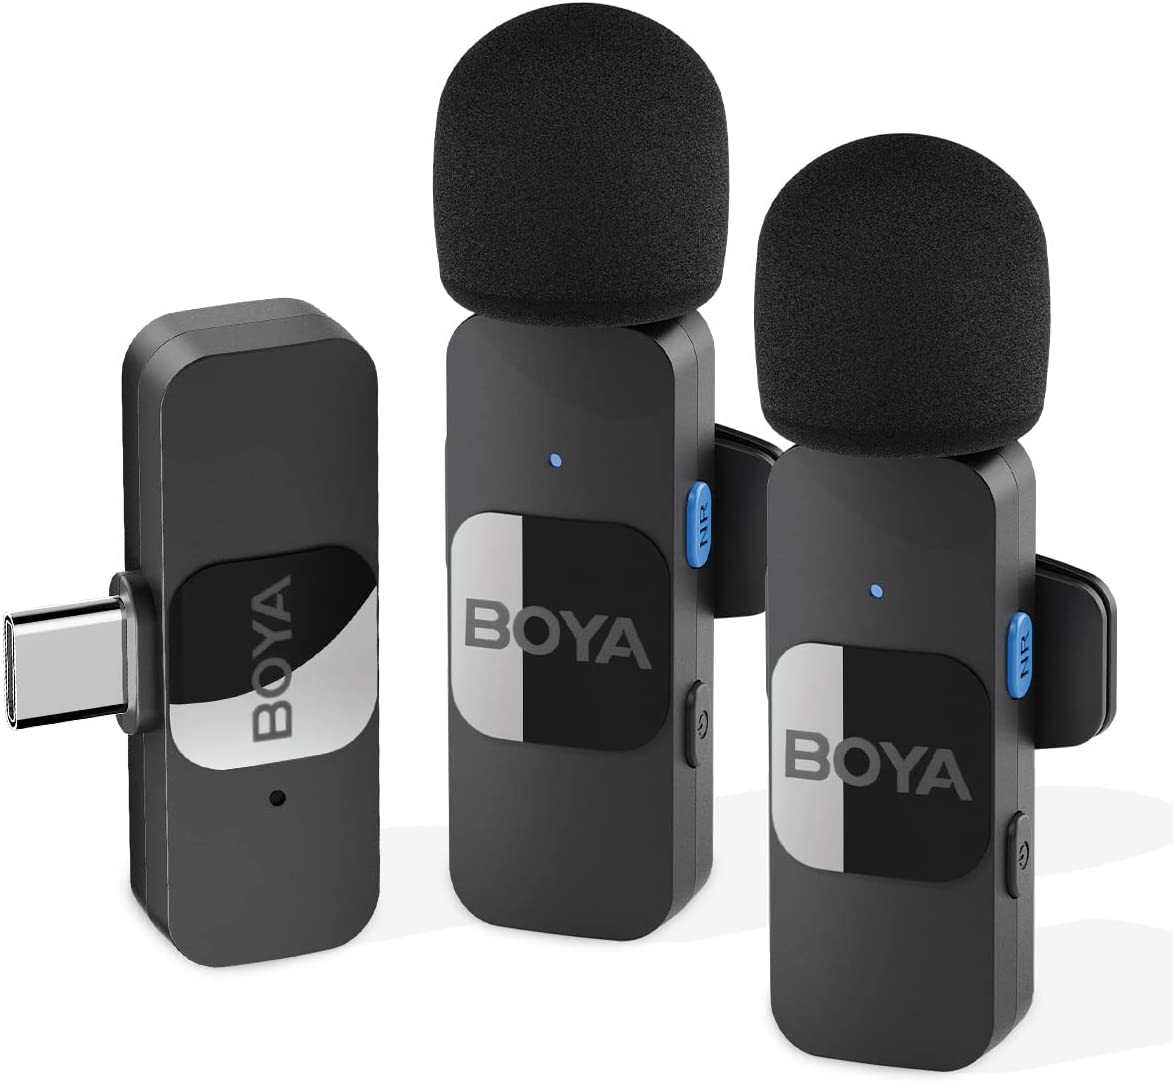 BOYA BY-V20 USB-C Wireless Microphone,Mini Lapel Mic with NoiseCancelling Compatibale with Android/Type-C Smartphone Laptop for YouTube Speaking Podcast Facebook Vlogging Video Recording